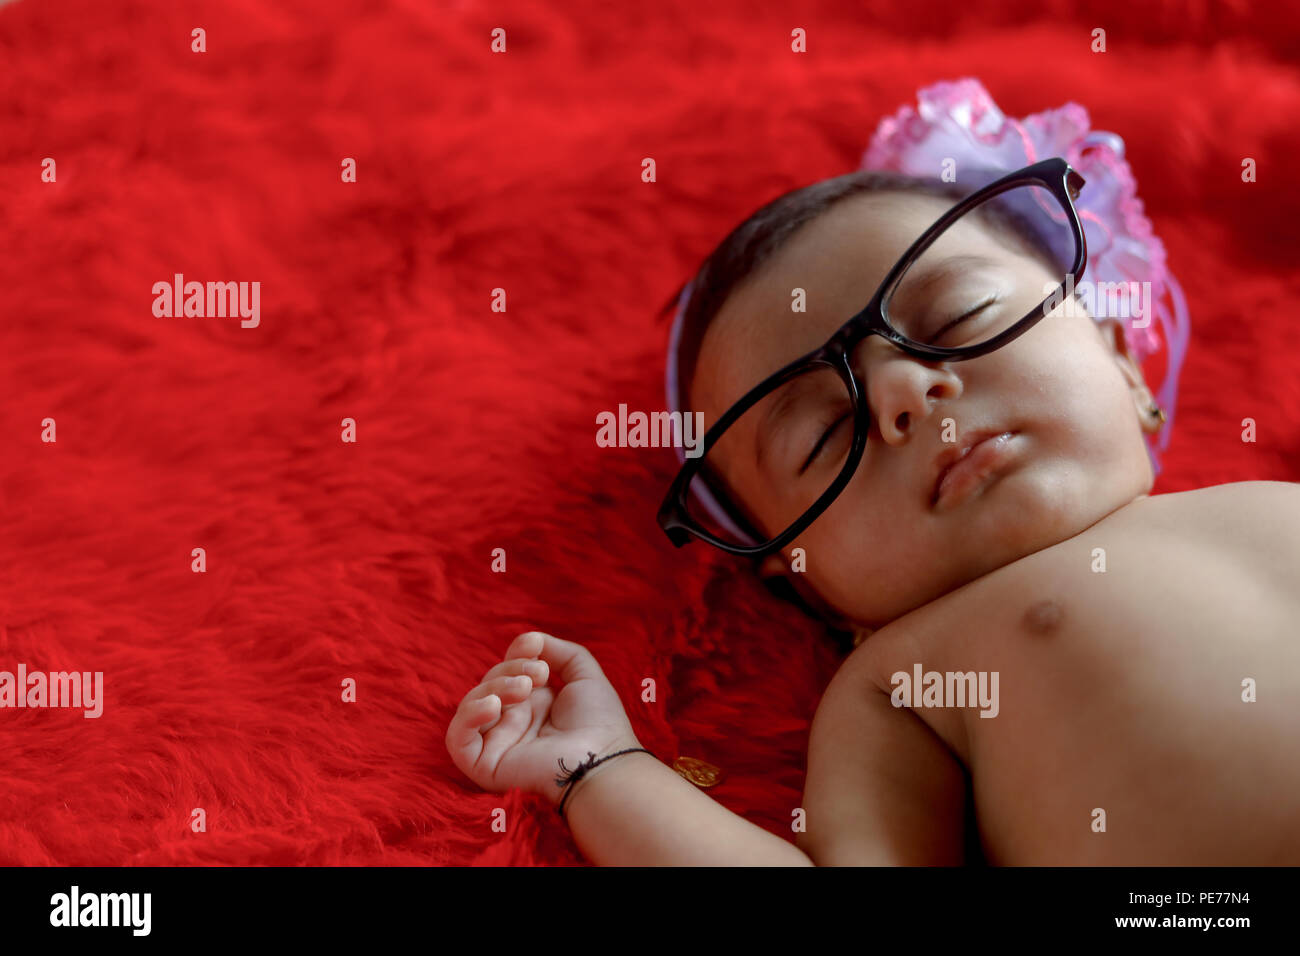 cute Indian baby girl on spectacles Stock Photo